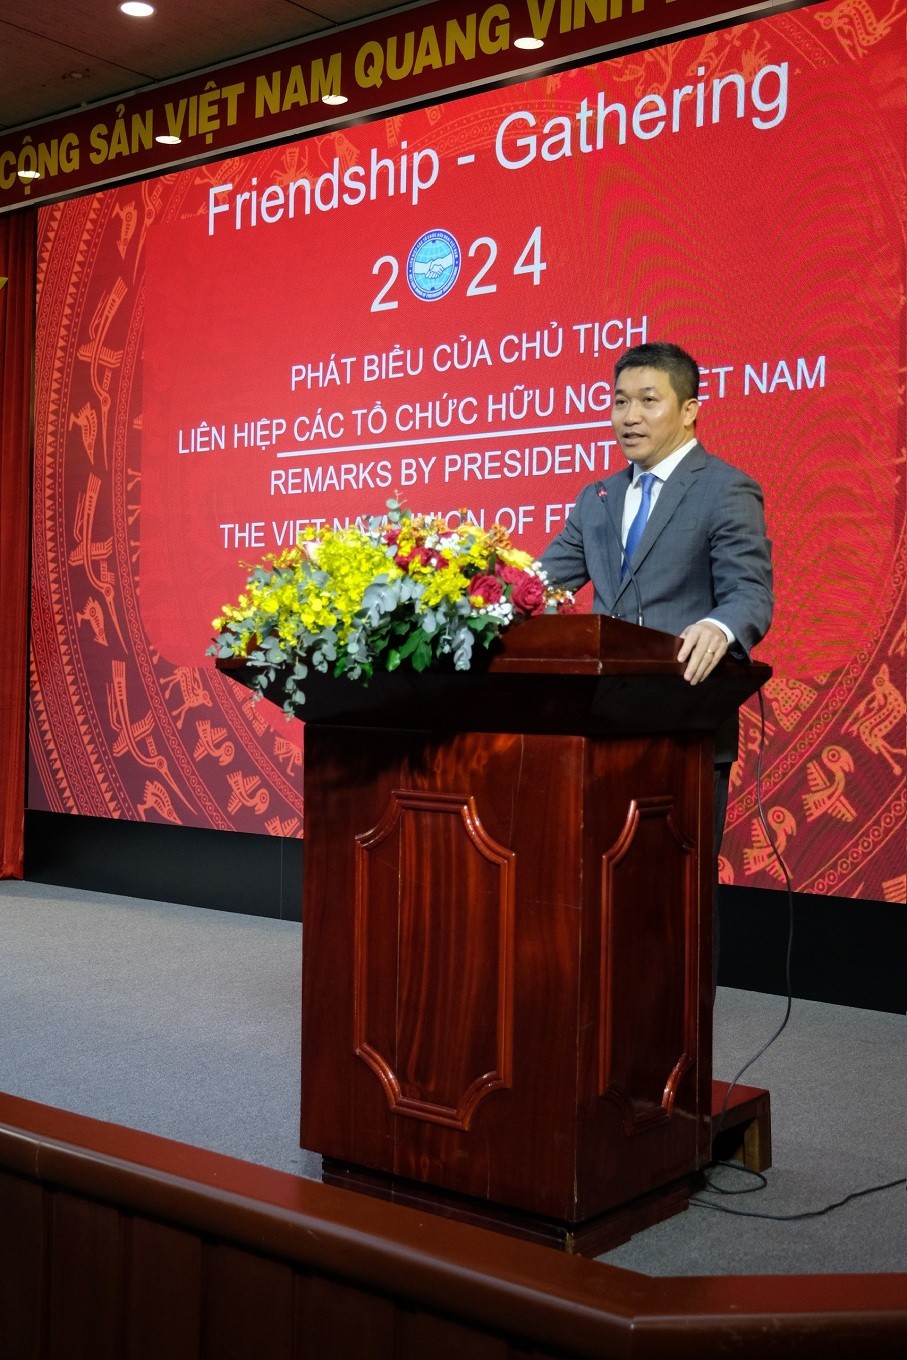 Cultivates Friendship between Vietnamese People and International Community